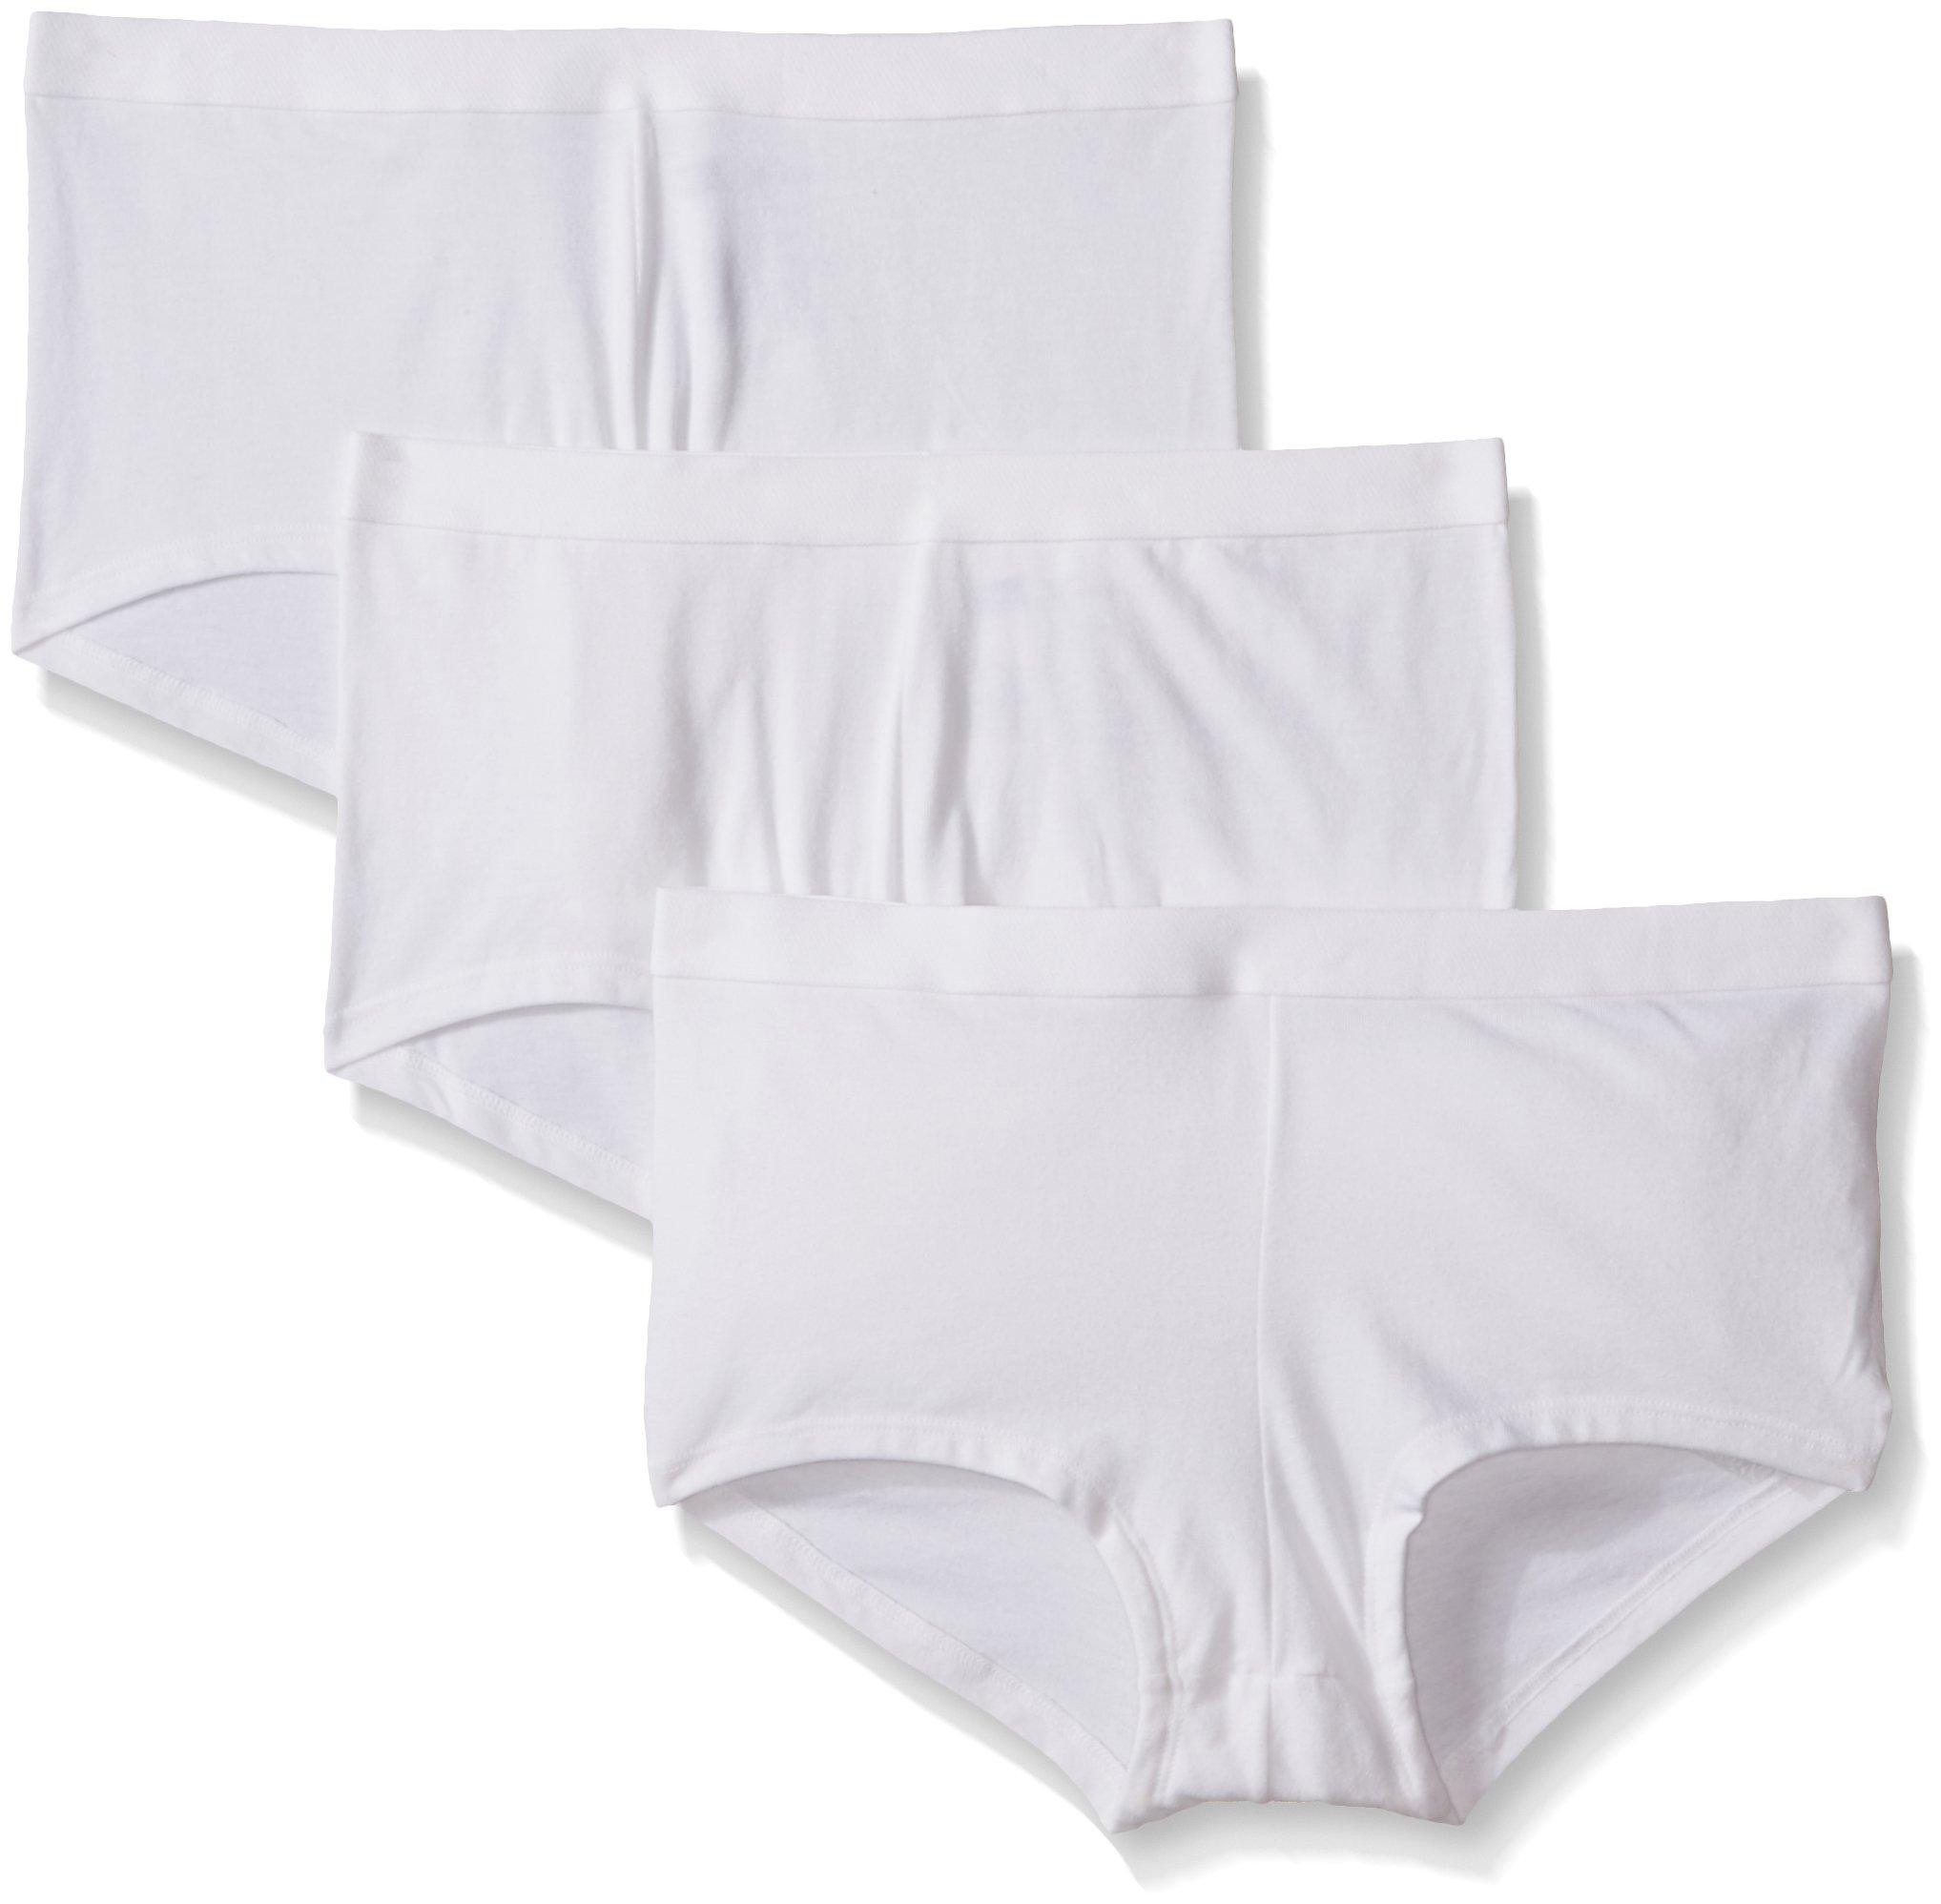 Hanes Hanes Cool Comfort Cotton Hipster Panty in White | Lyst